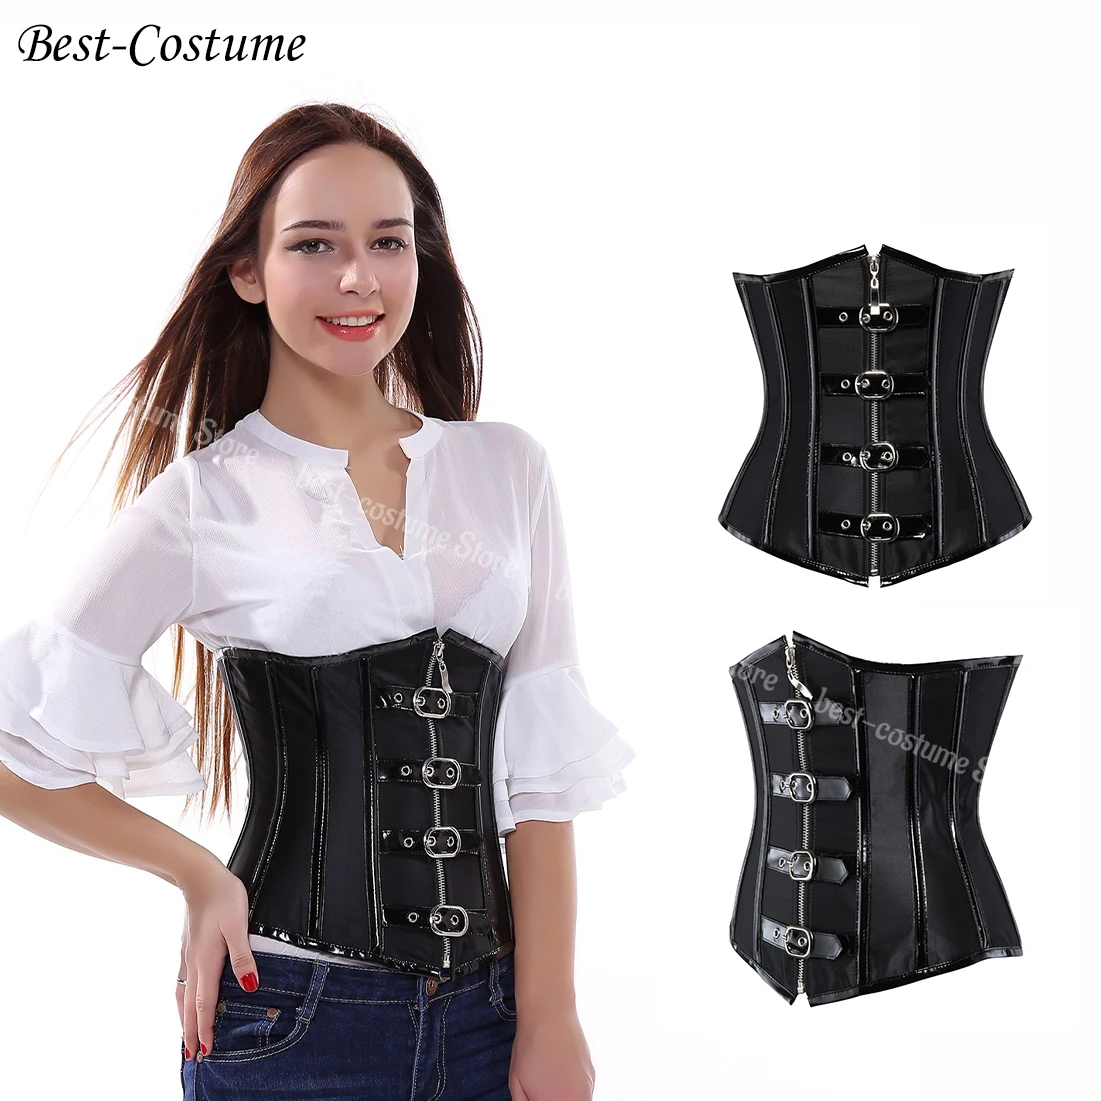 Sexy Gothic Spiral Steel Boned Corset Burlesque Steampunk Clothing Zipper Costume Bustiers Shapewear Black Red